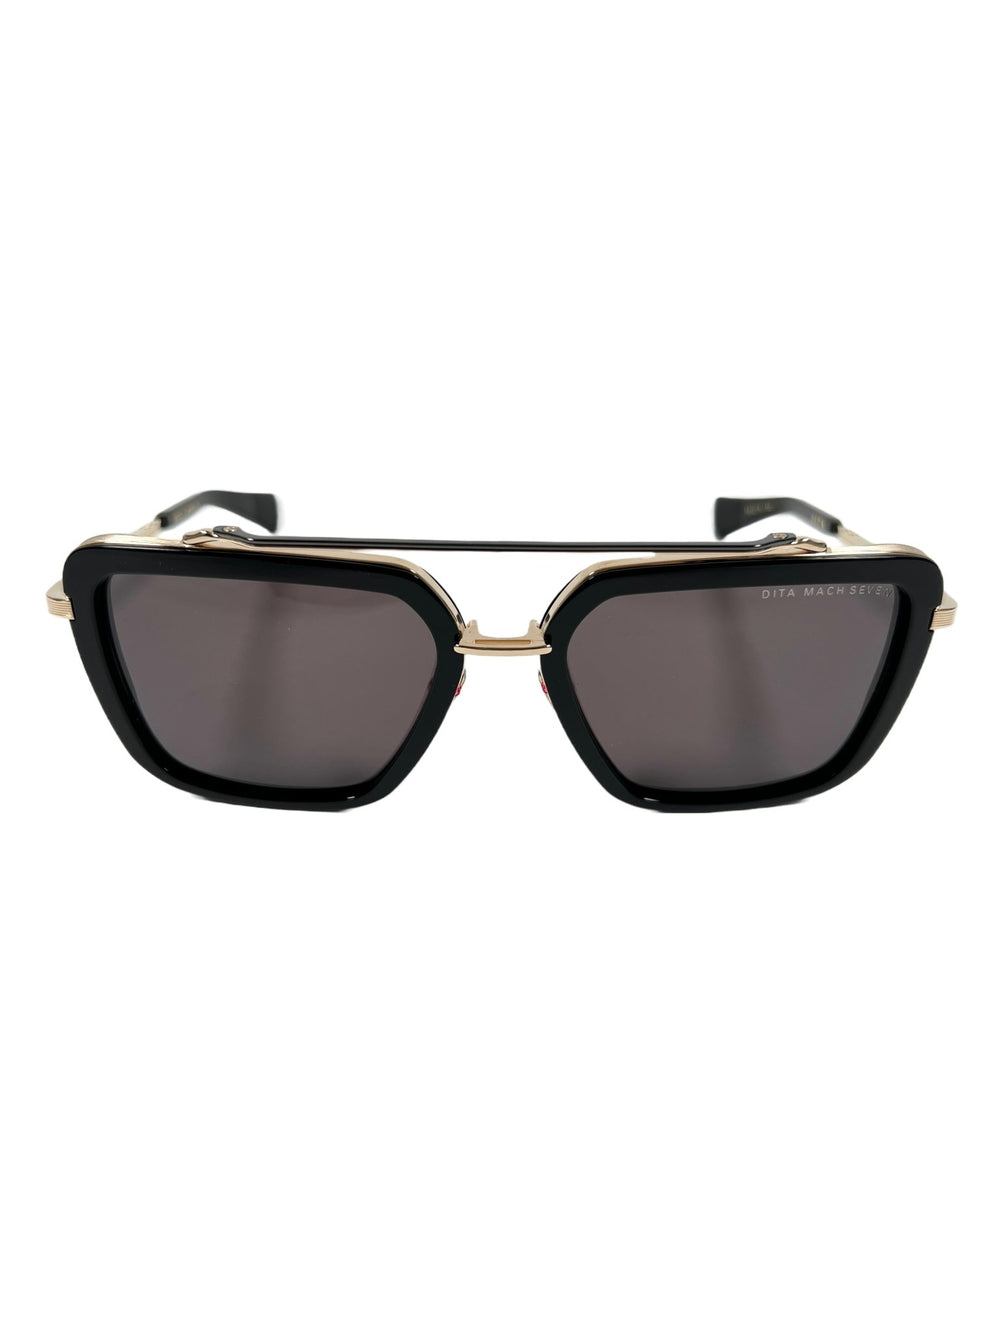 A pair of DITA MACH-SEVEN DTS135-56-01 sunglasses in black and gold.